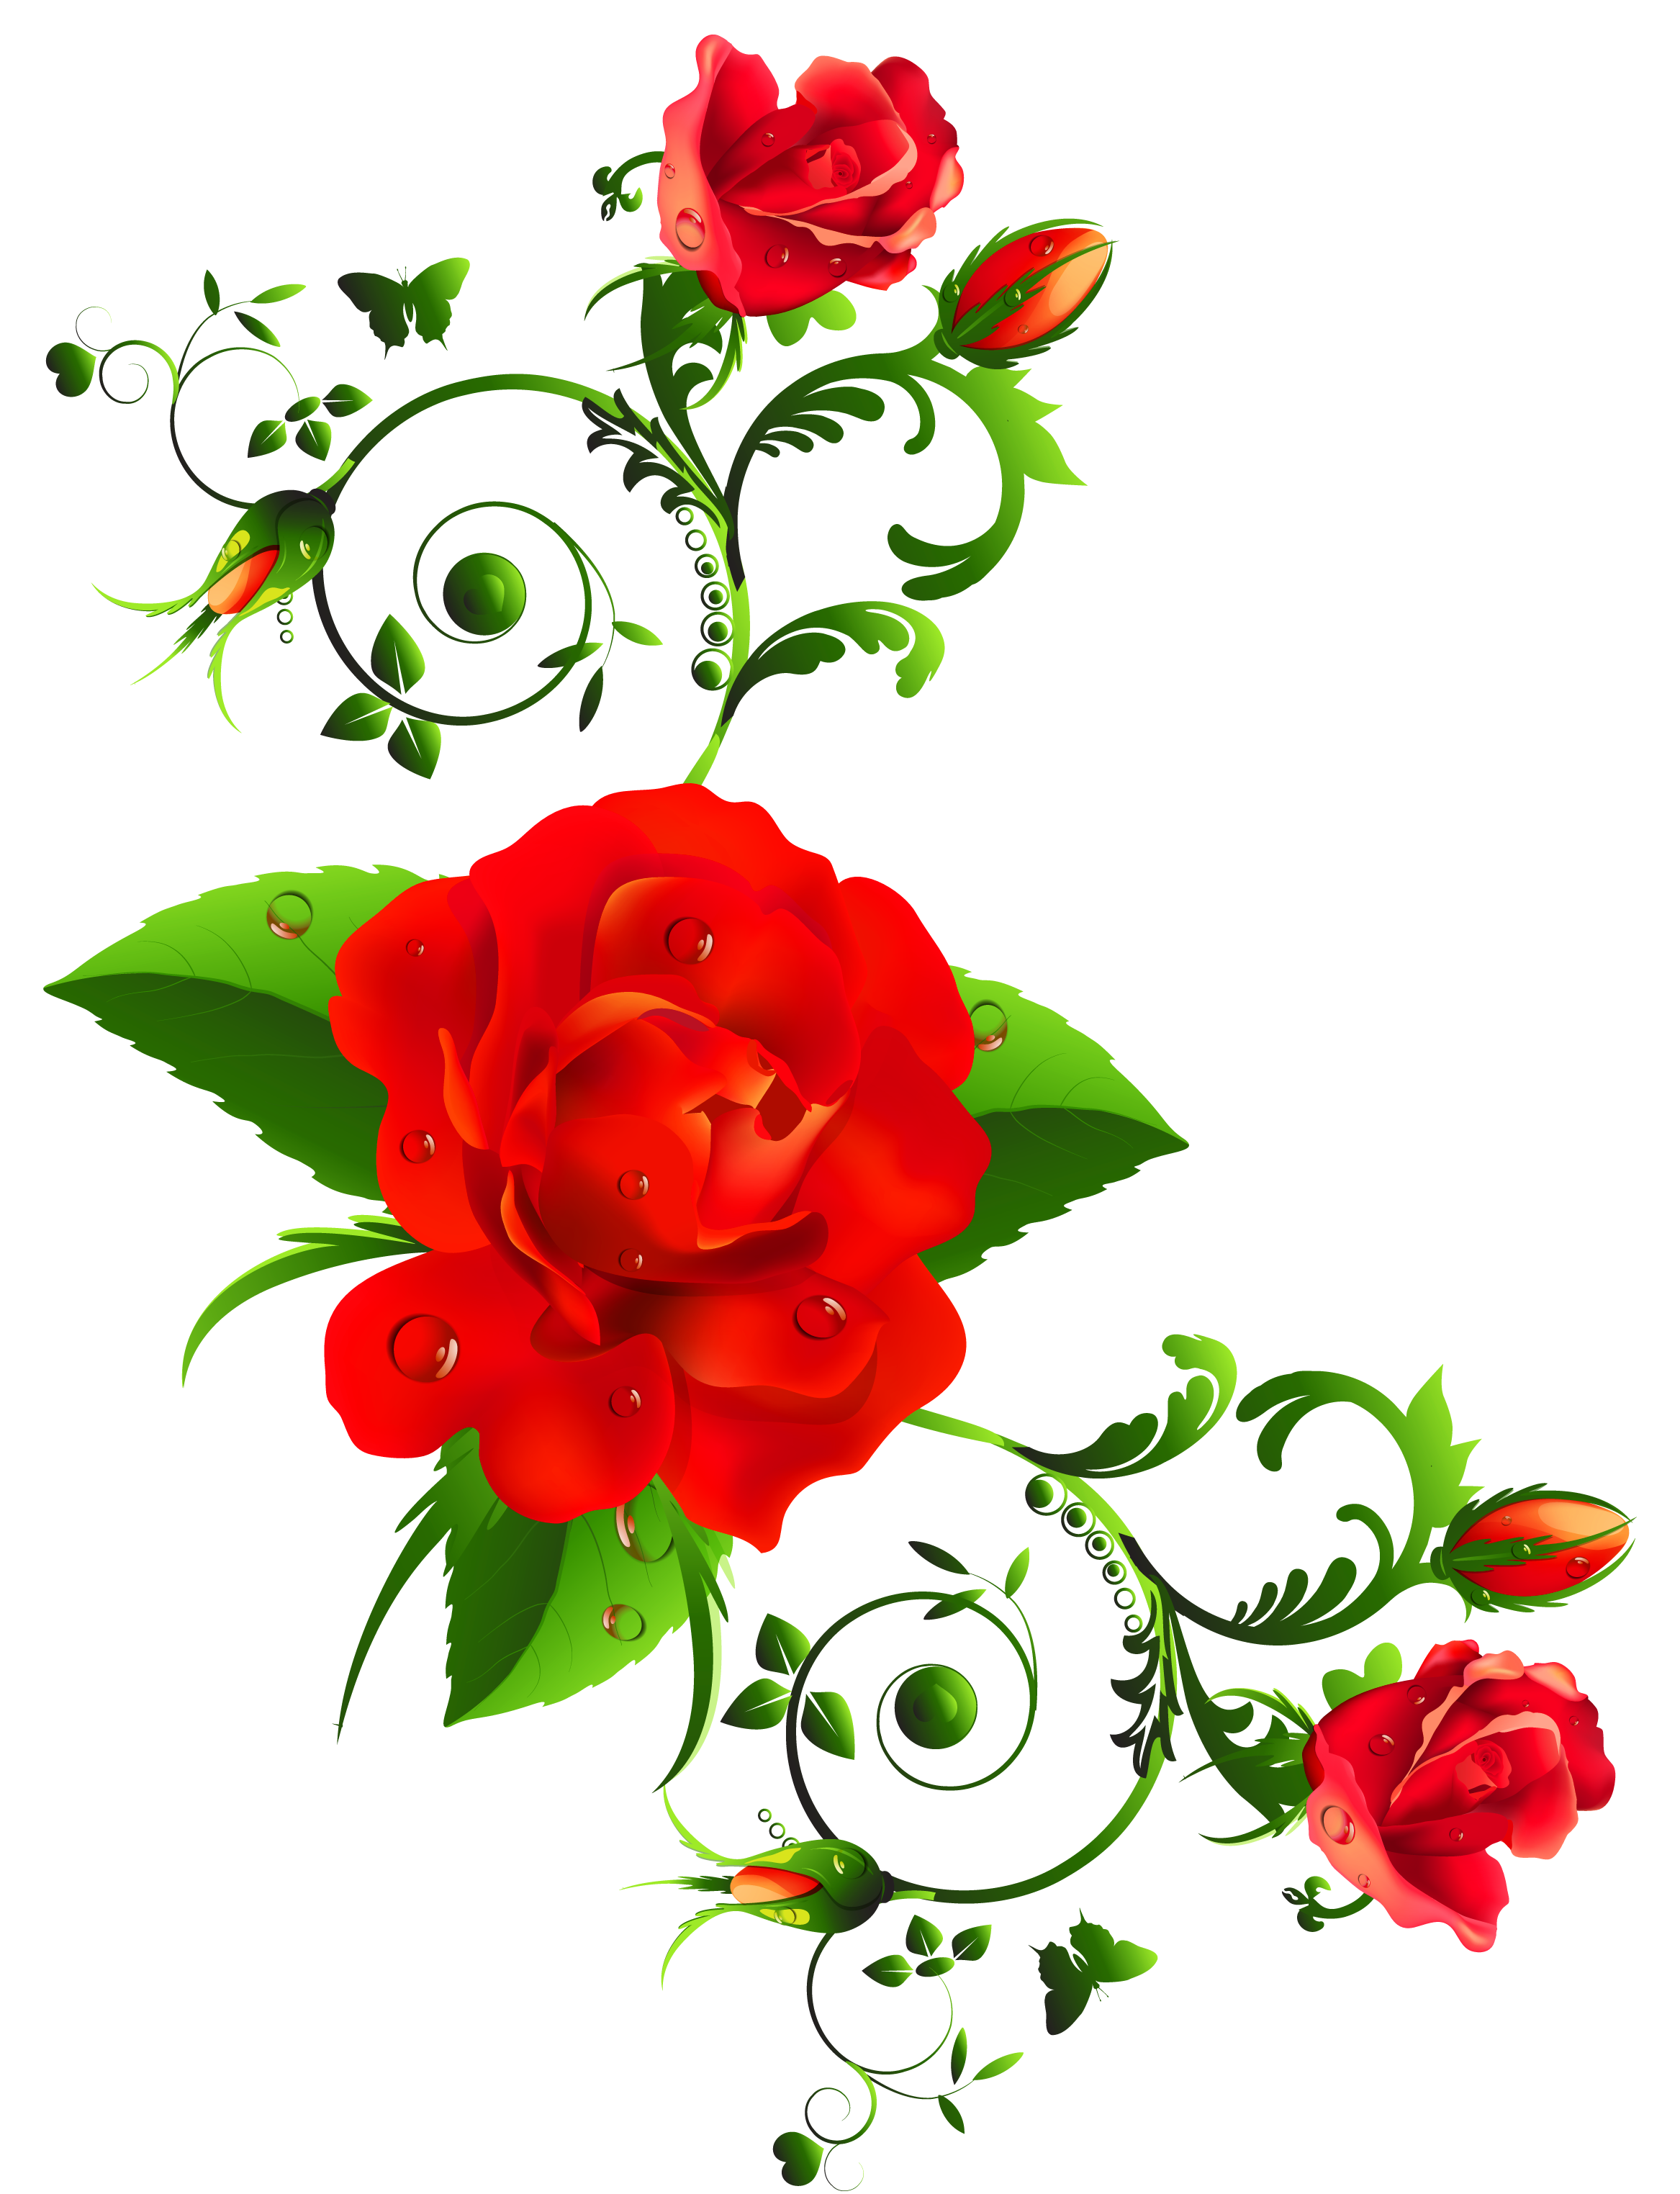 decorative clipart red flower